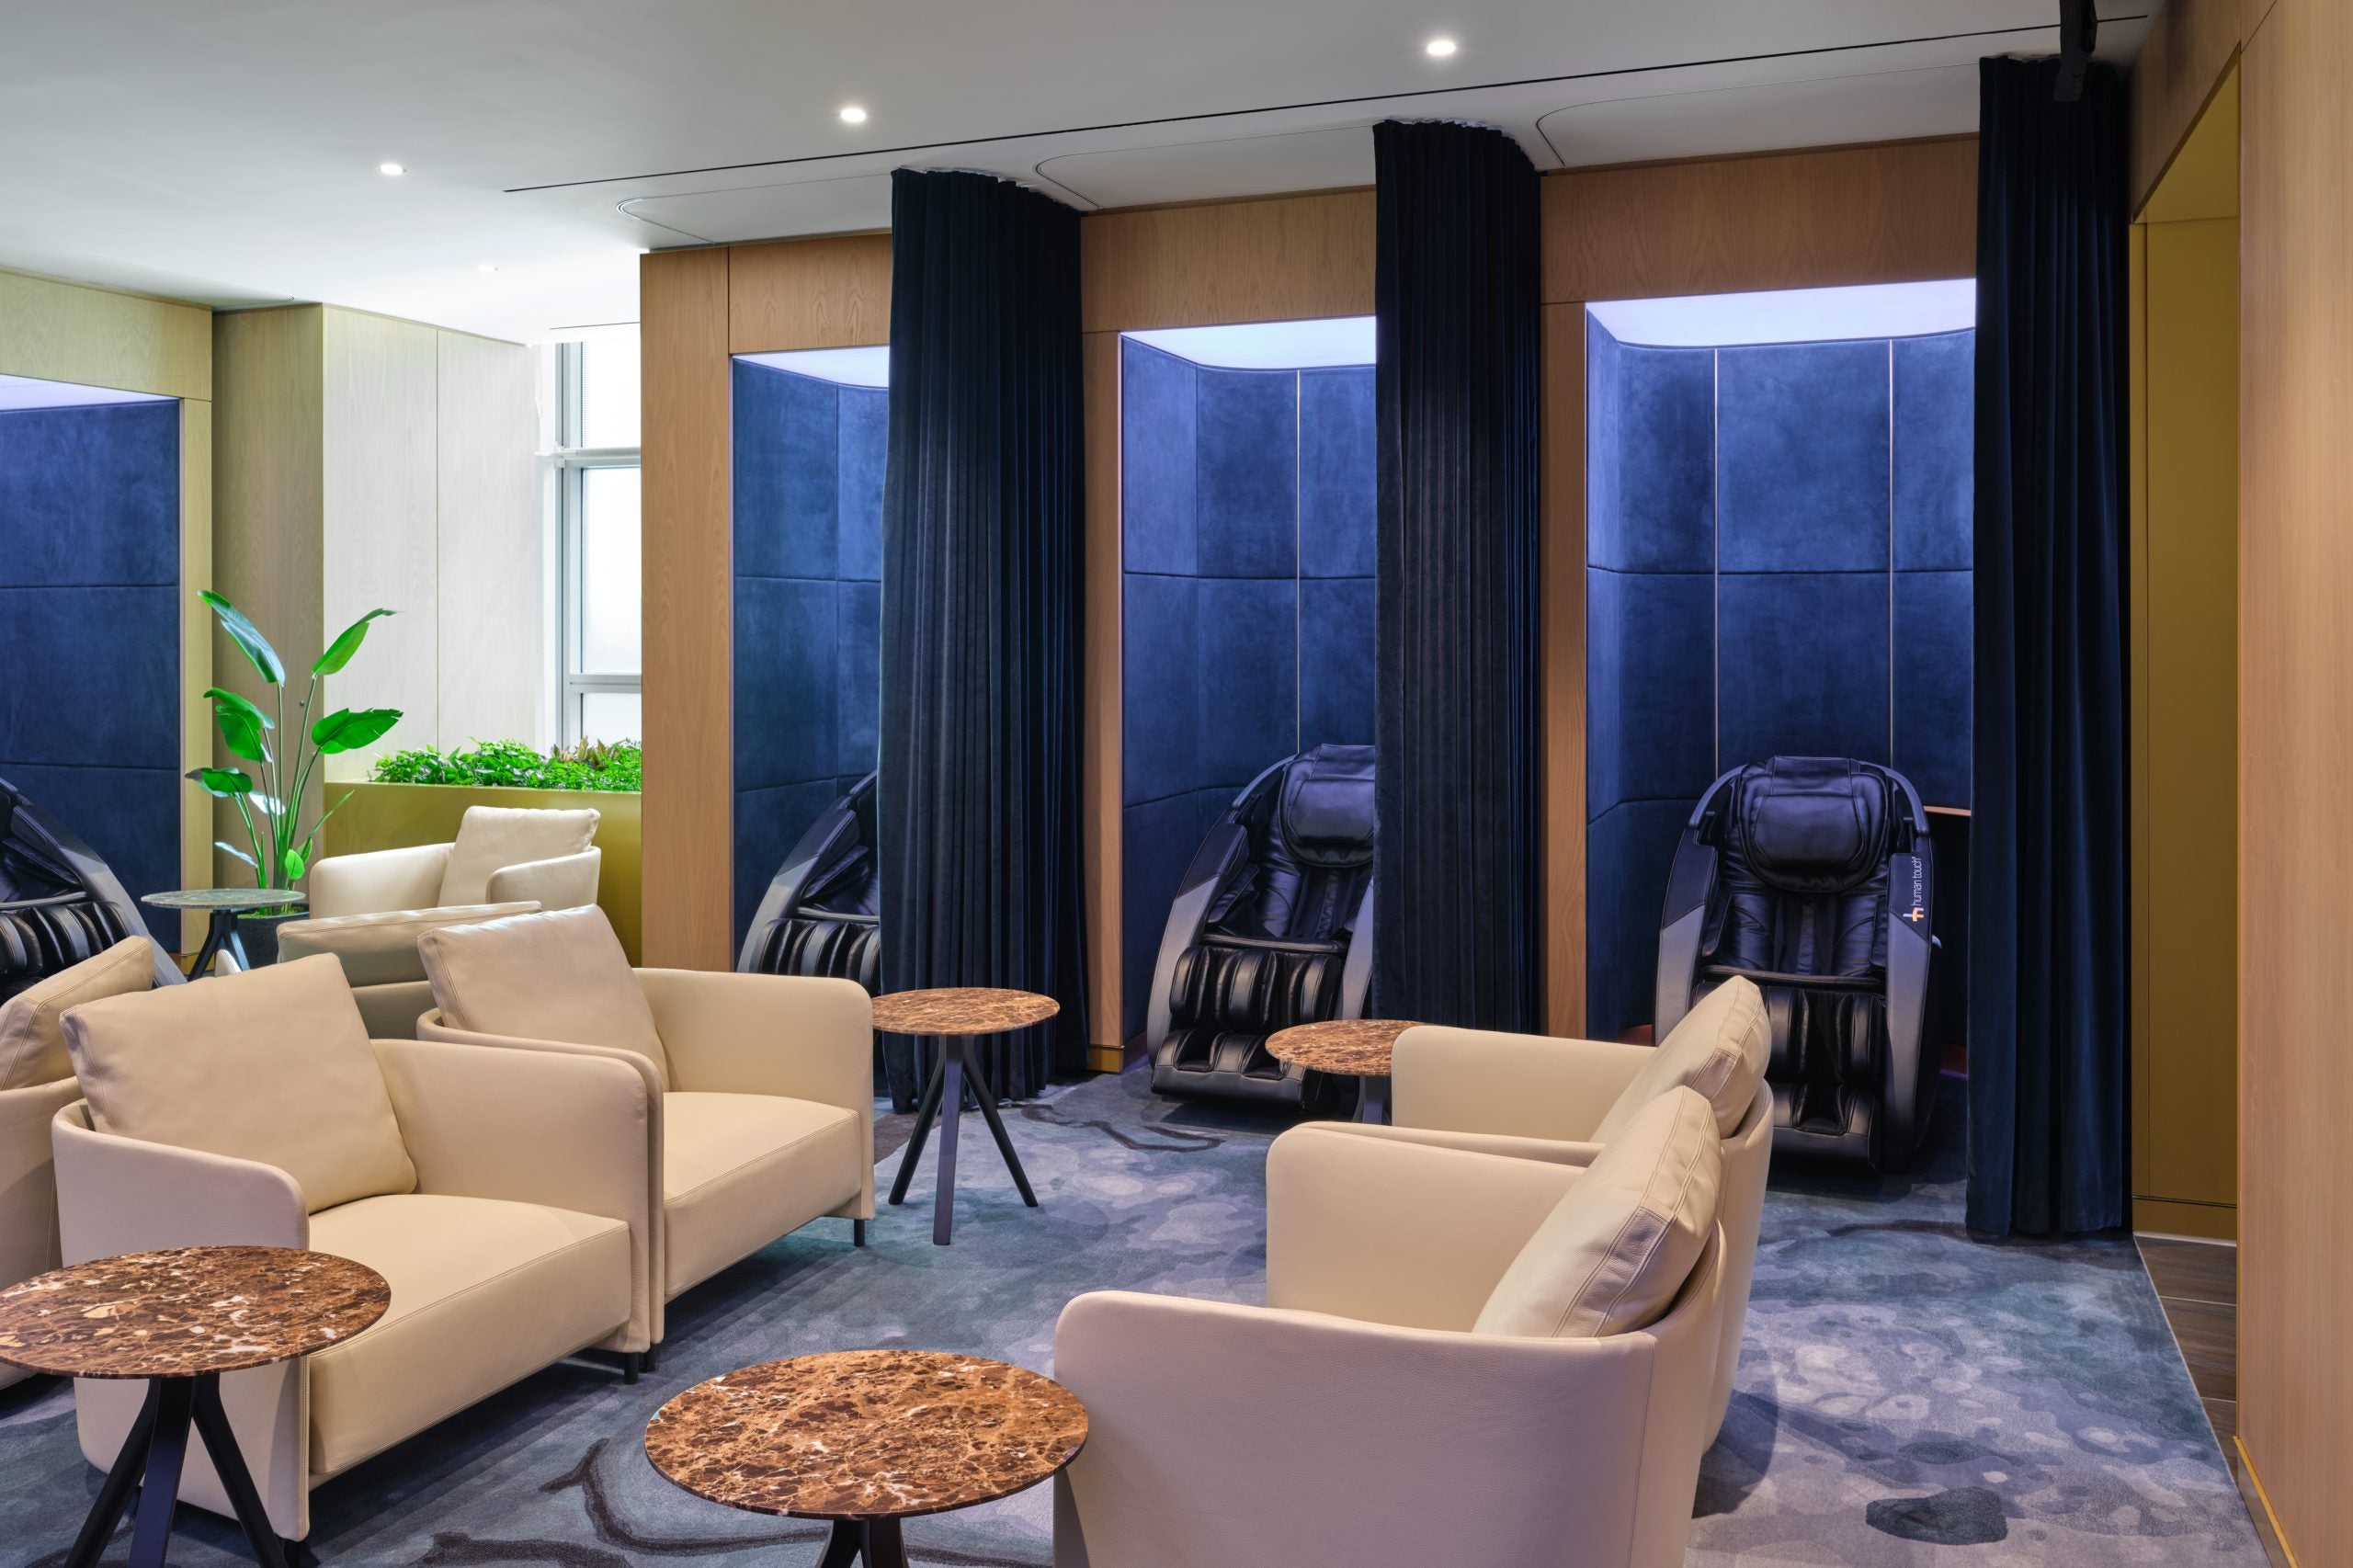 New York City’s Most Exclusive New Hot Spot Is The Delta One Lounge In JFK Airport